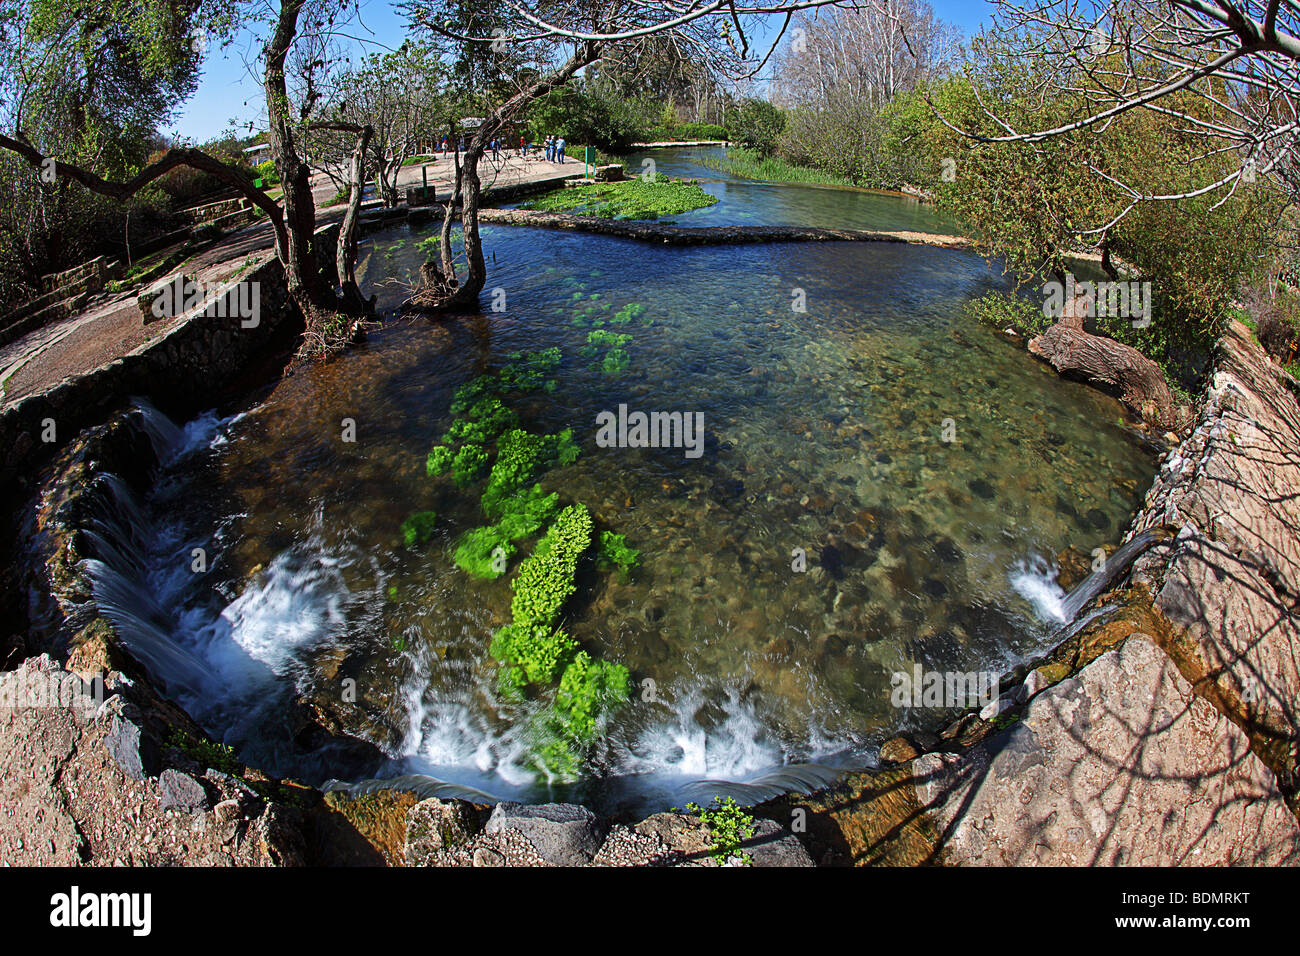 Israel, Golan Heights Natural spring at the Banias or Hermon river park Stock Photo